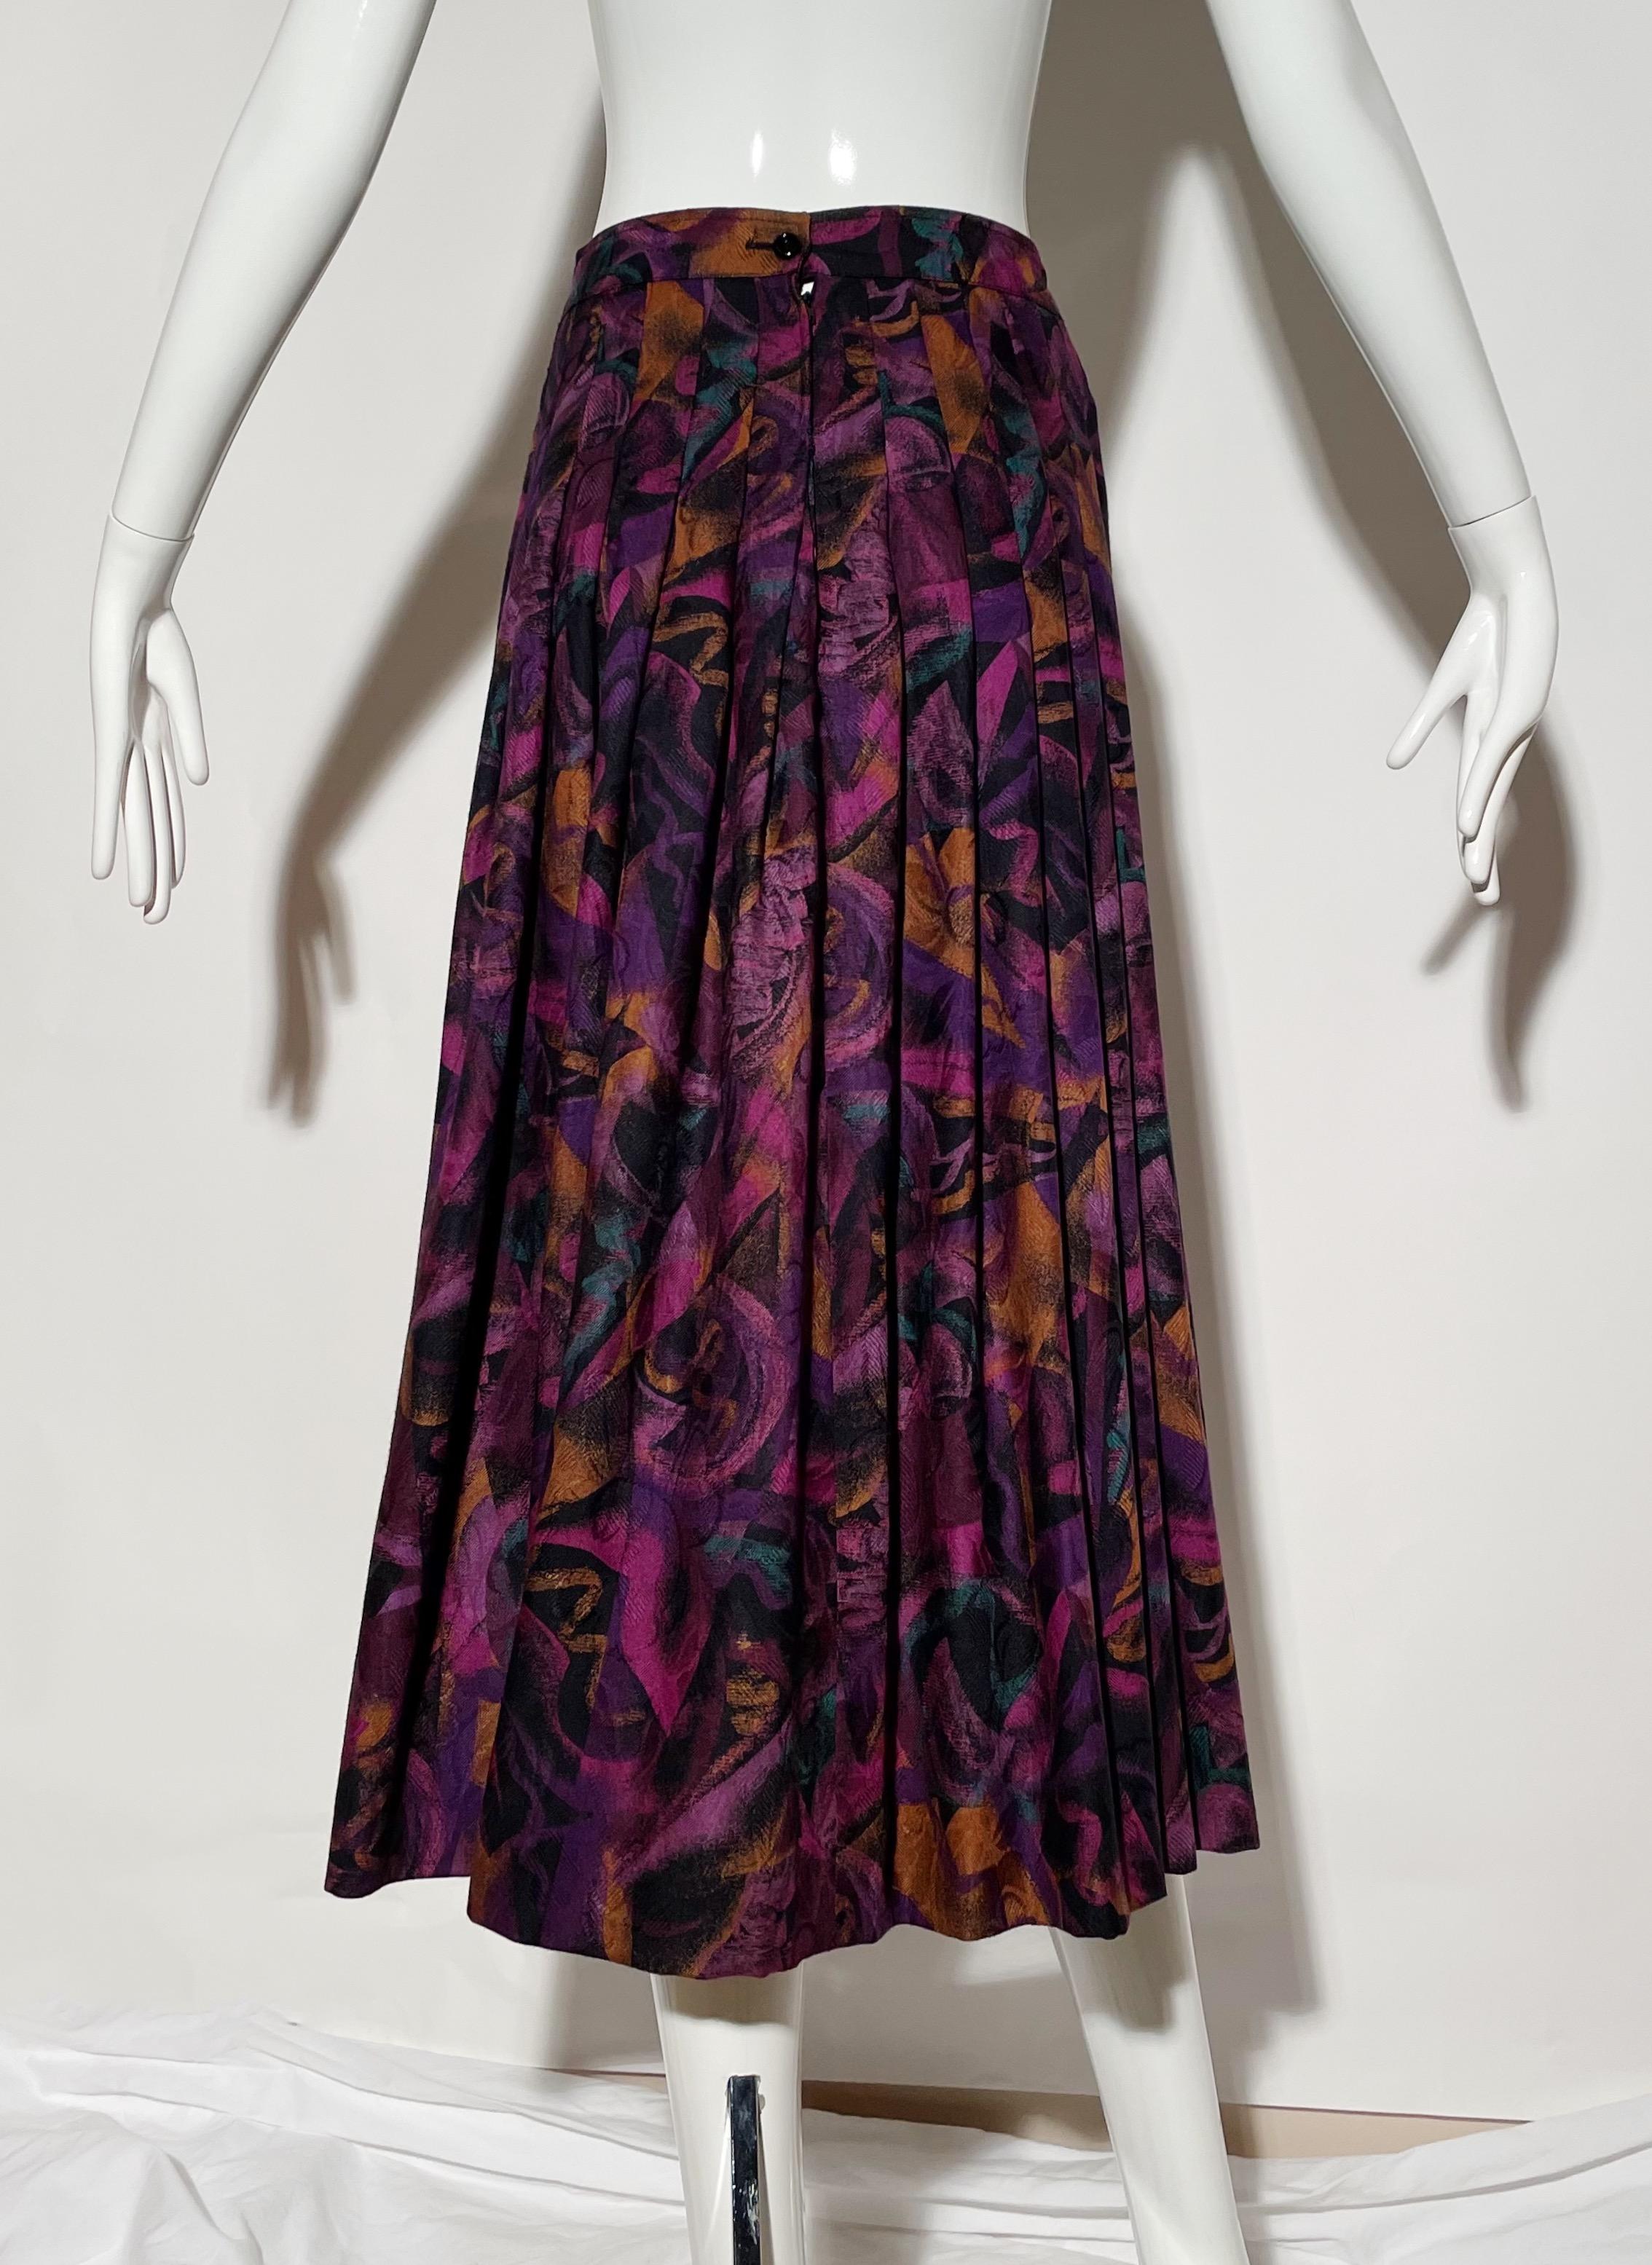 Emanuel Ungaro Pleated Printed Skirt  In Excellent Condition For Sale In Waterford, MI